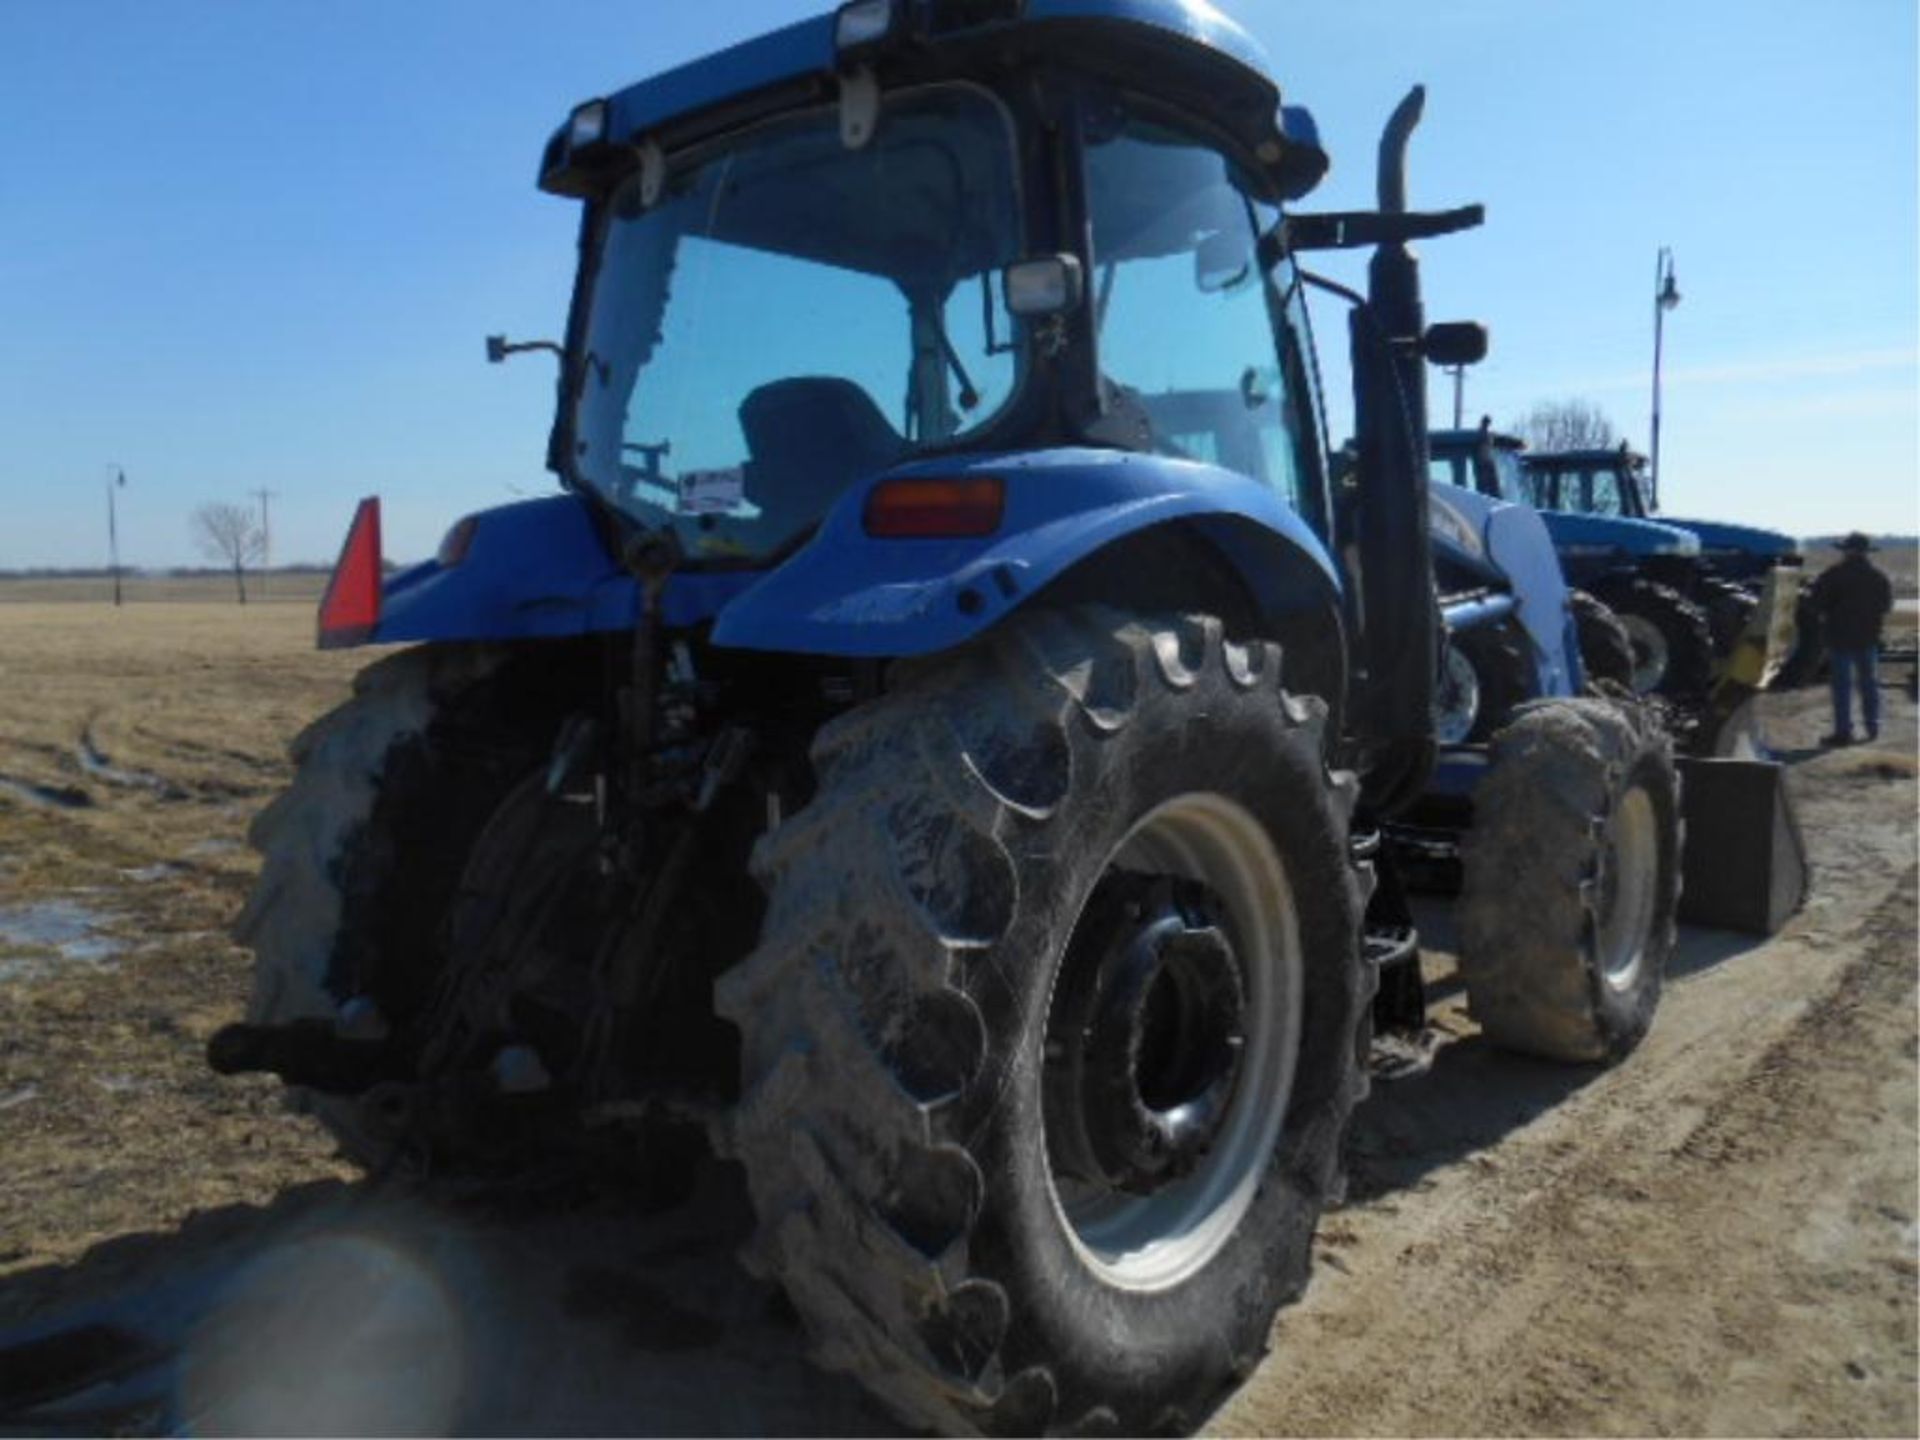 New Holland TS115 Tractor. '06, sn#ACP258890 9523 Hrs, MFWD, Cab, 115 HP, 12/2, 3 Pt, 2 Hyd. - Image 4 of 20